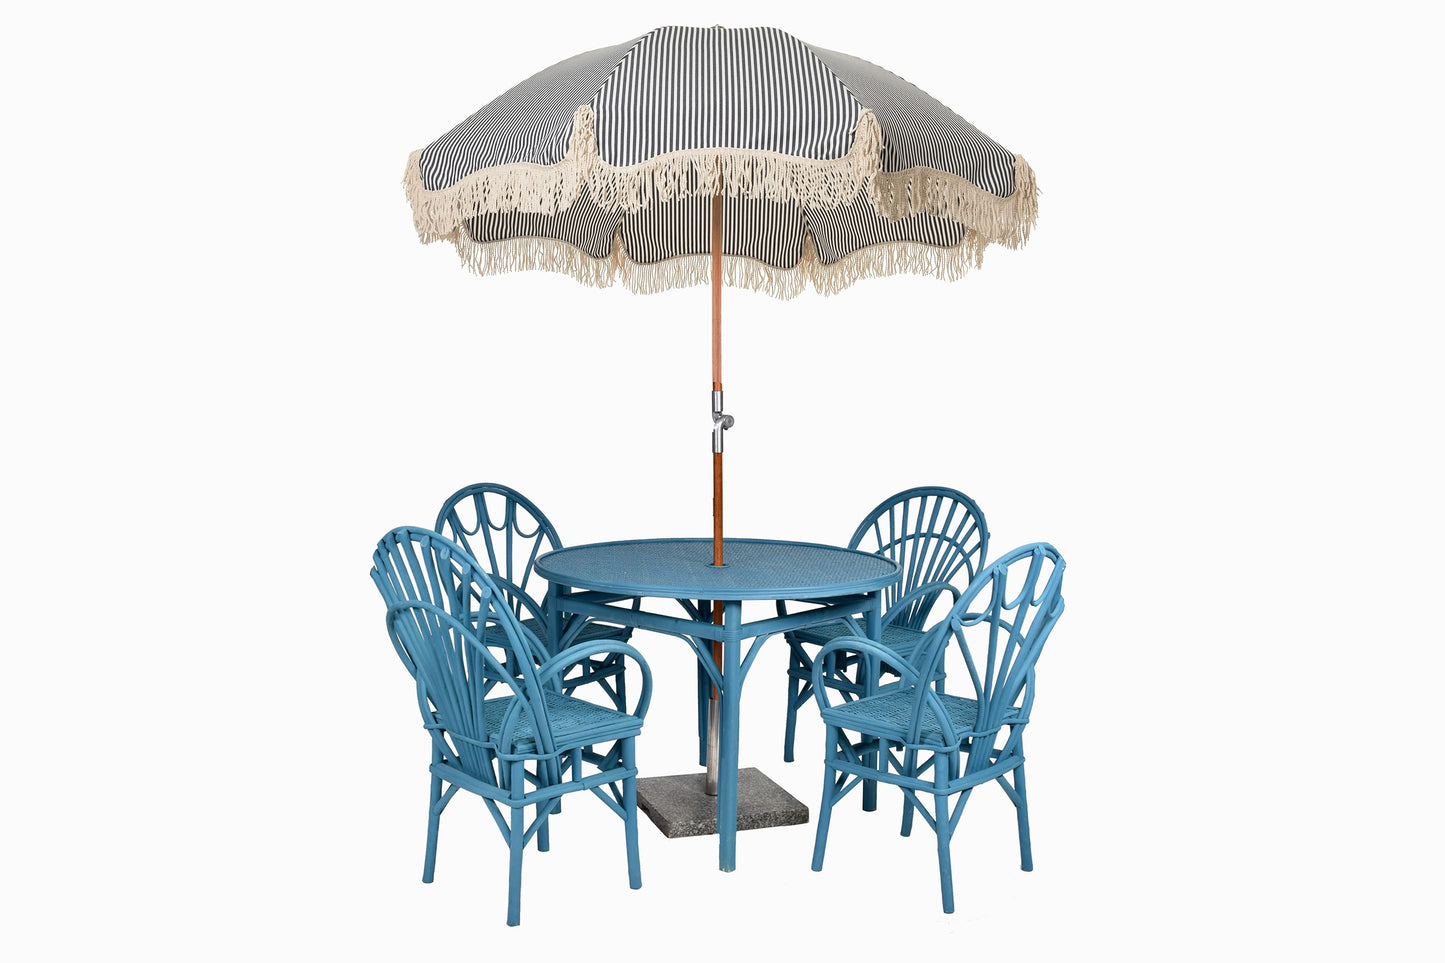 Bentwood and rattan chair Ref B blue